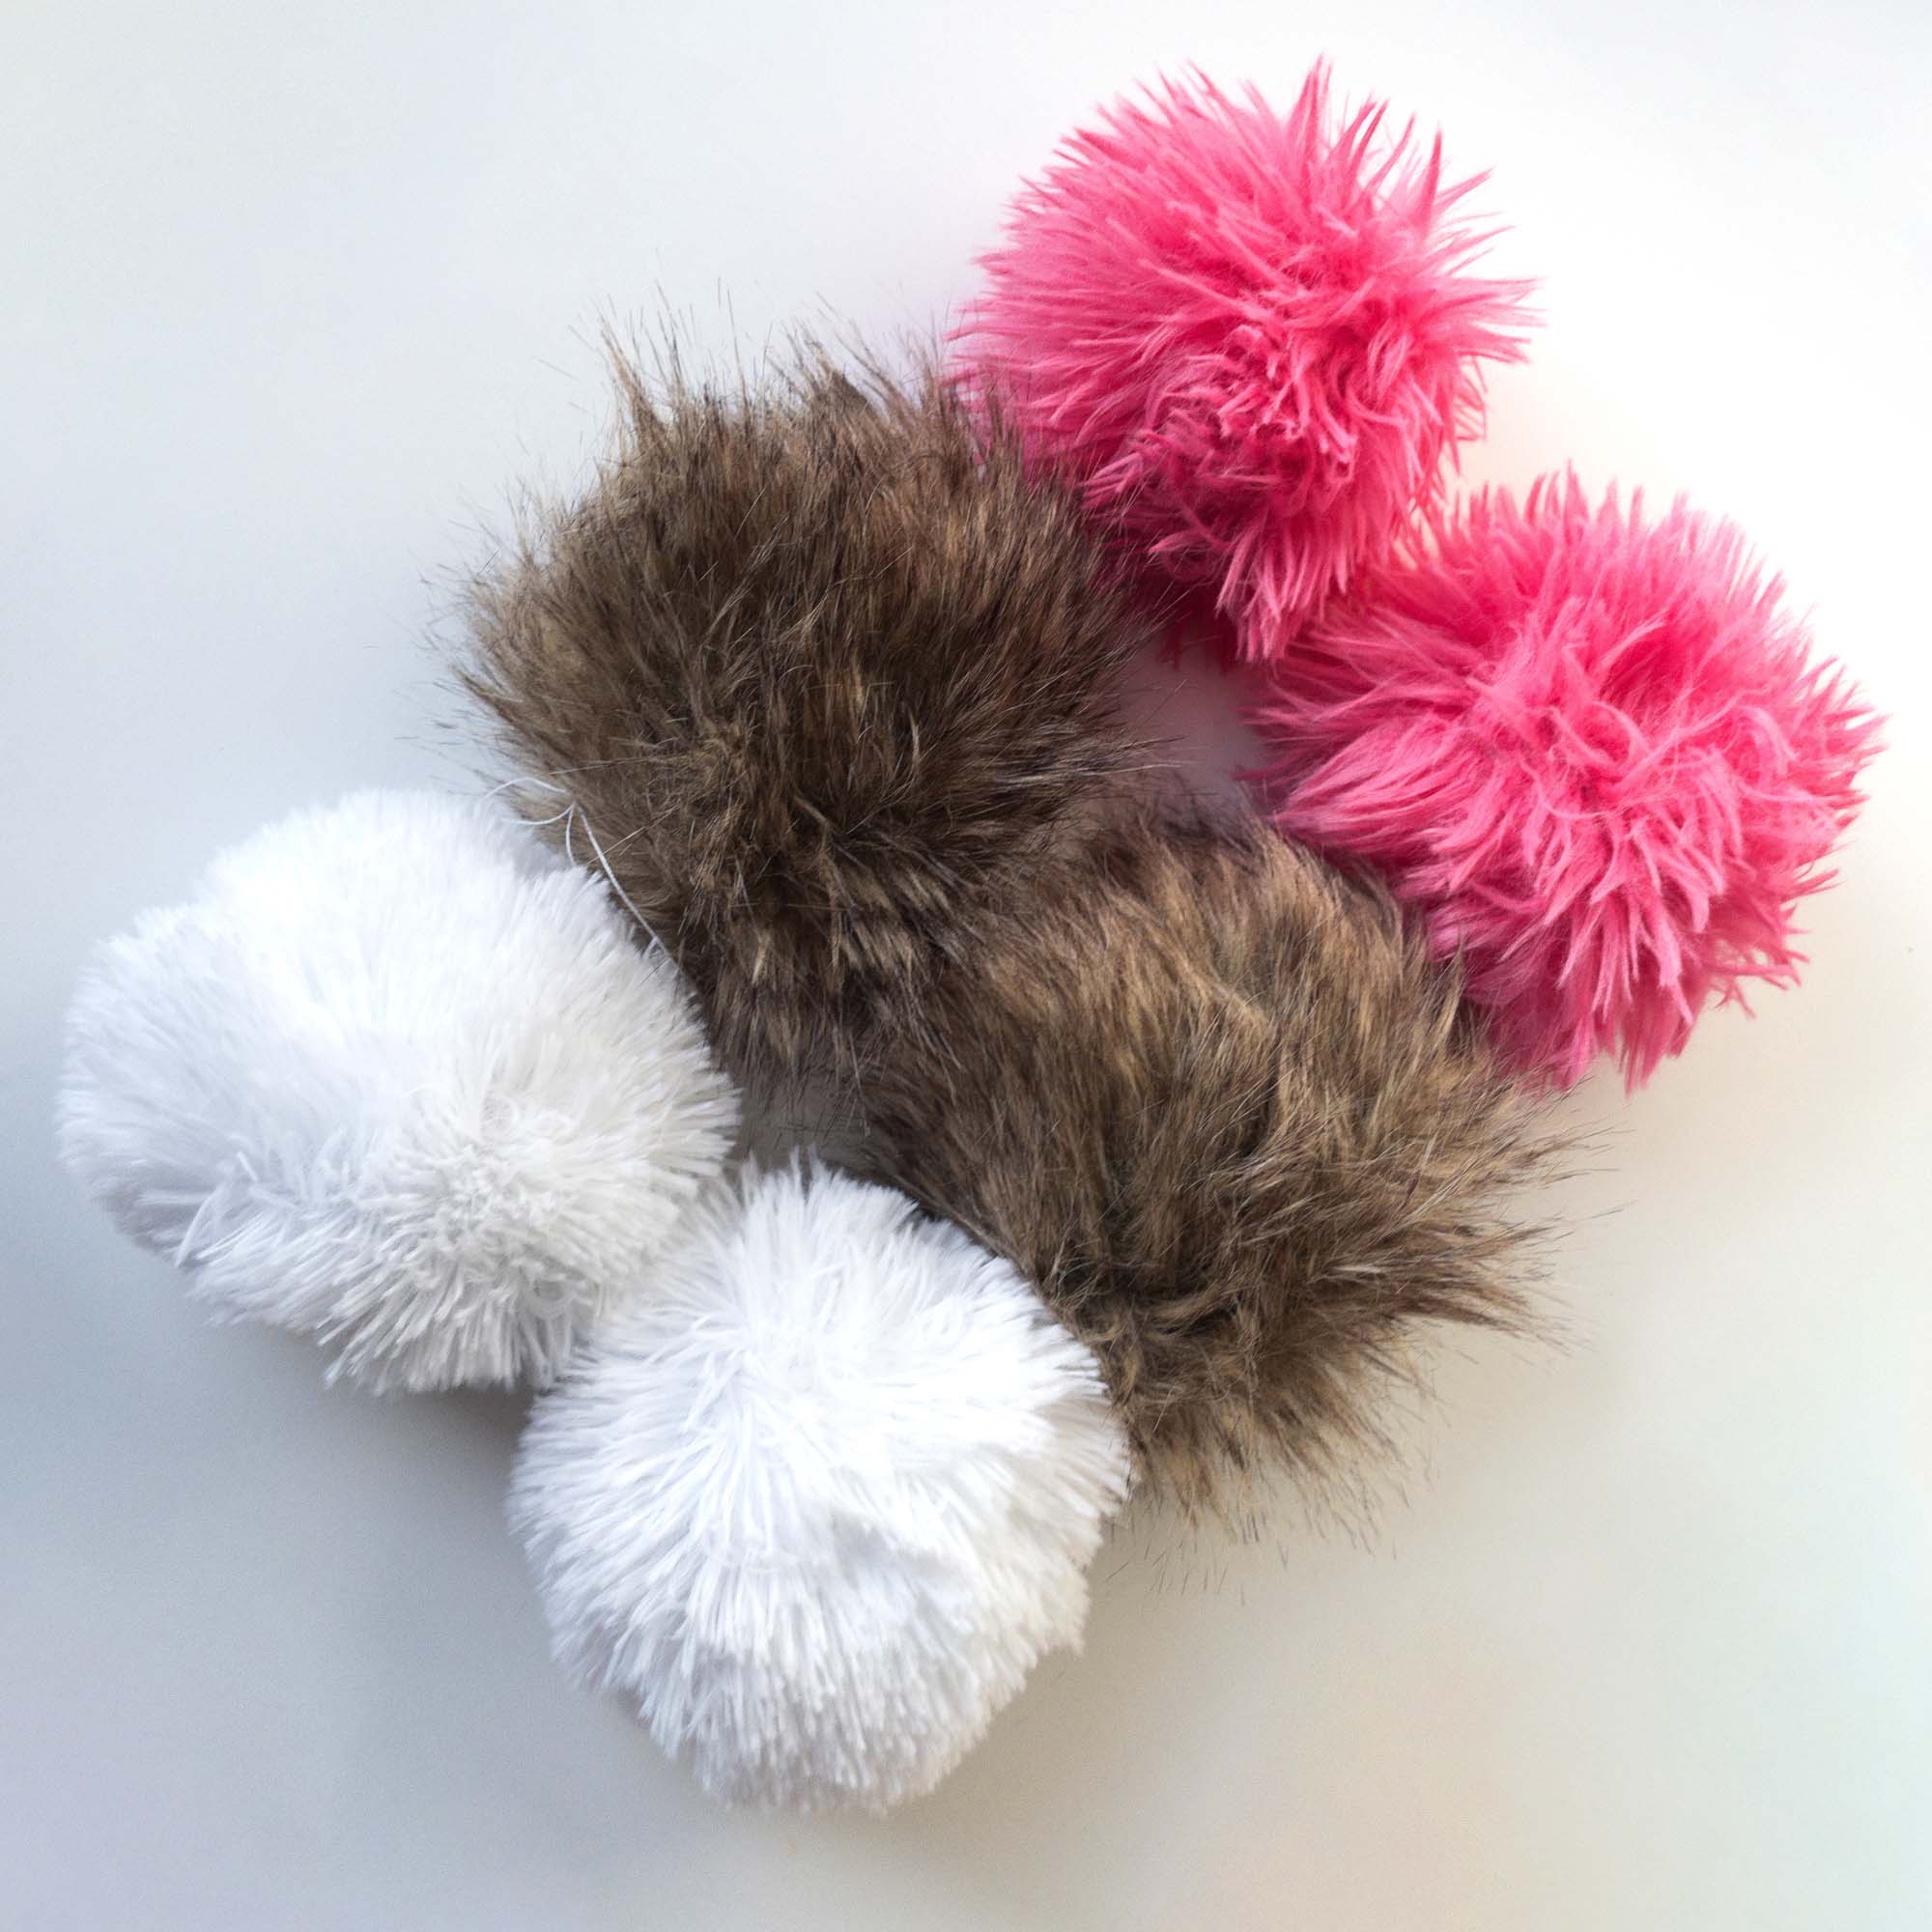 Six faux fur pompoms in three colors: fuschia pink, white, and rabbit fur brindle